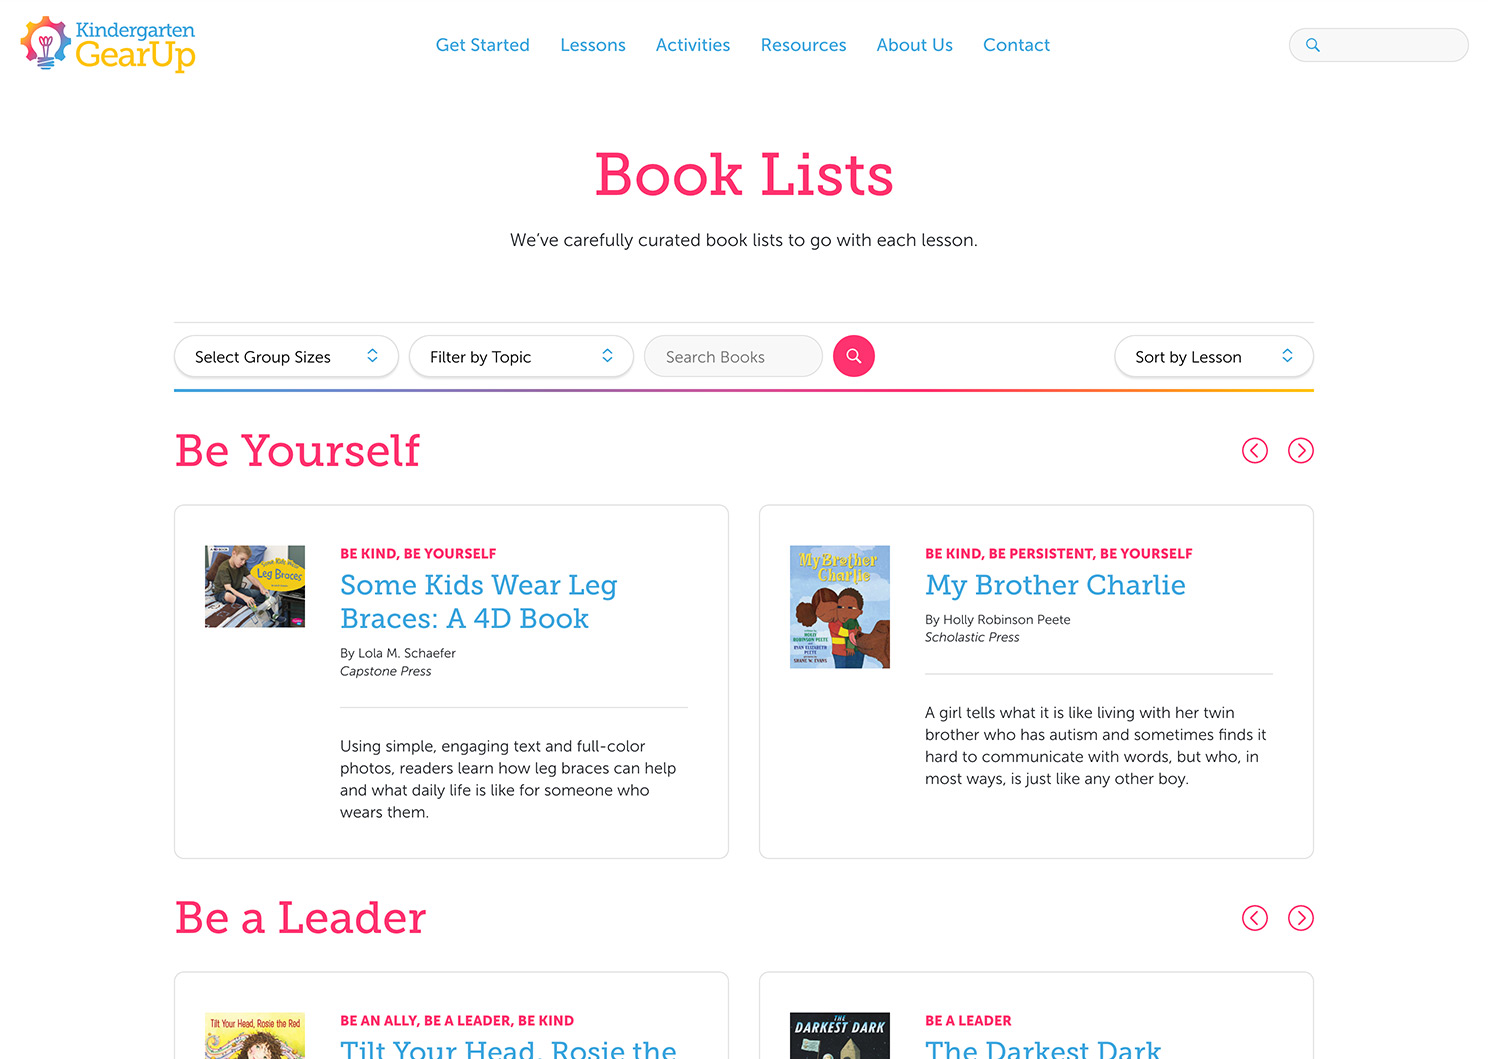 The "Book Lists" page on the Kindergarten Gear Up website